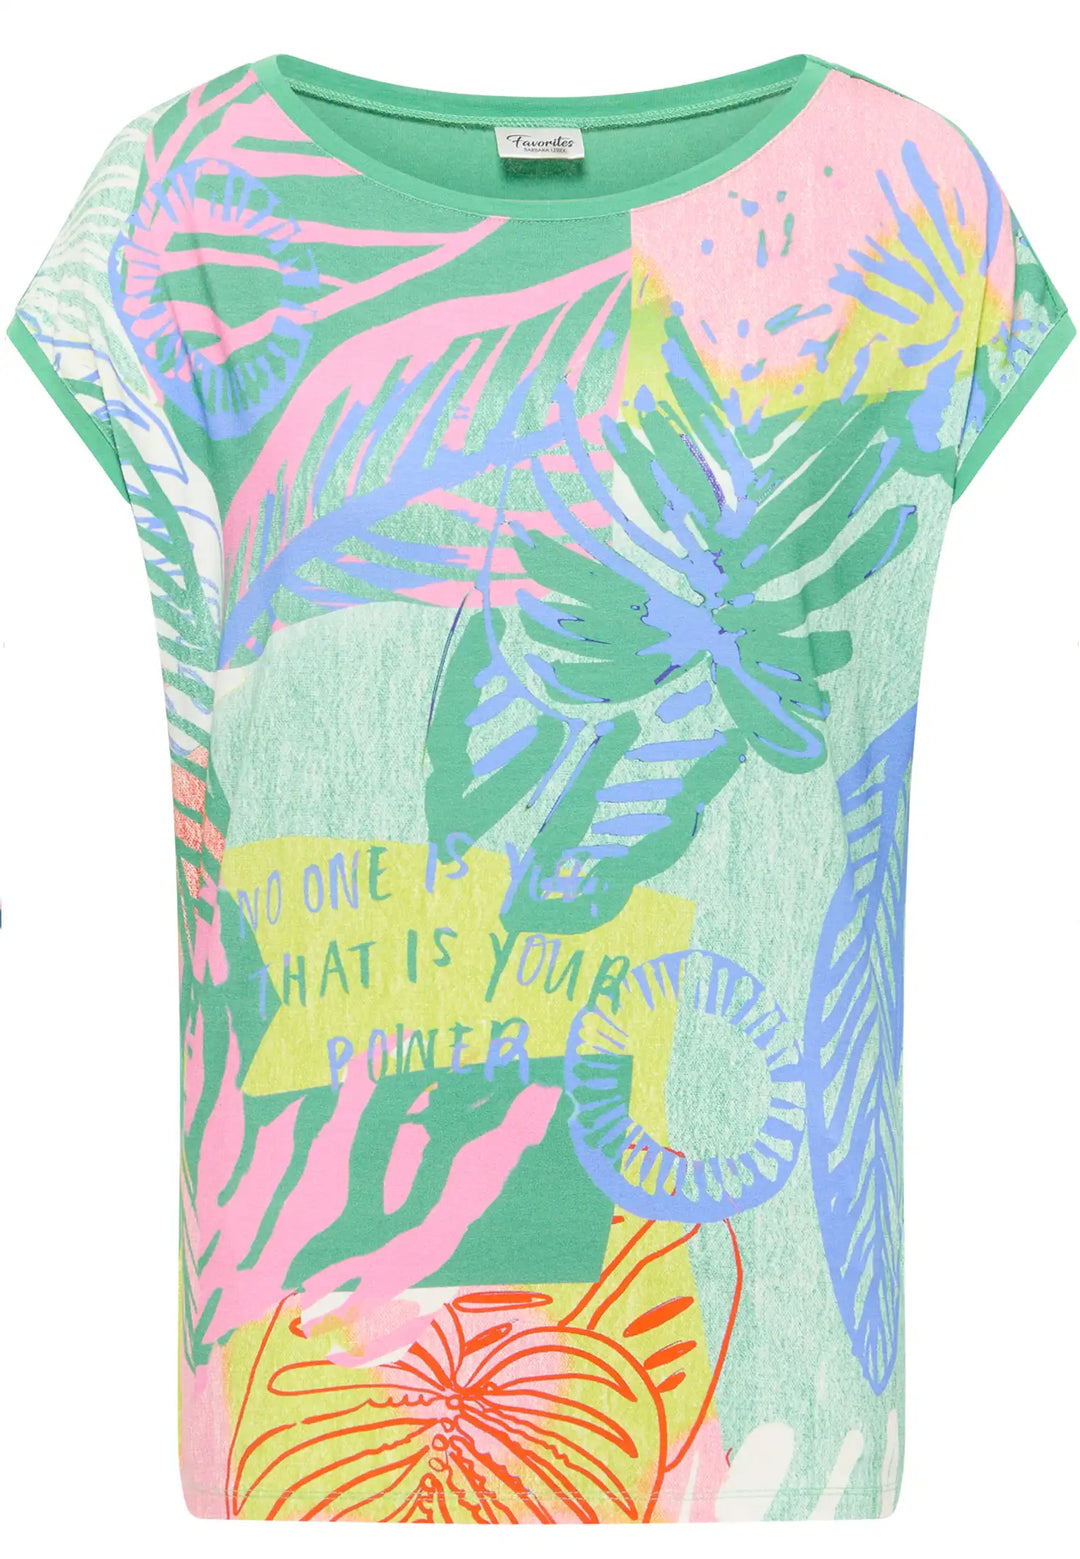 Colourful tropical print top with inspirational quote and scoop neckline, exuding vibrant energy and unique style, style 57680042-650